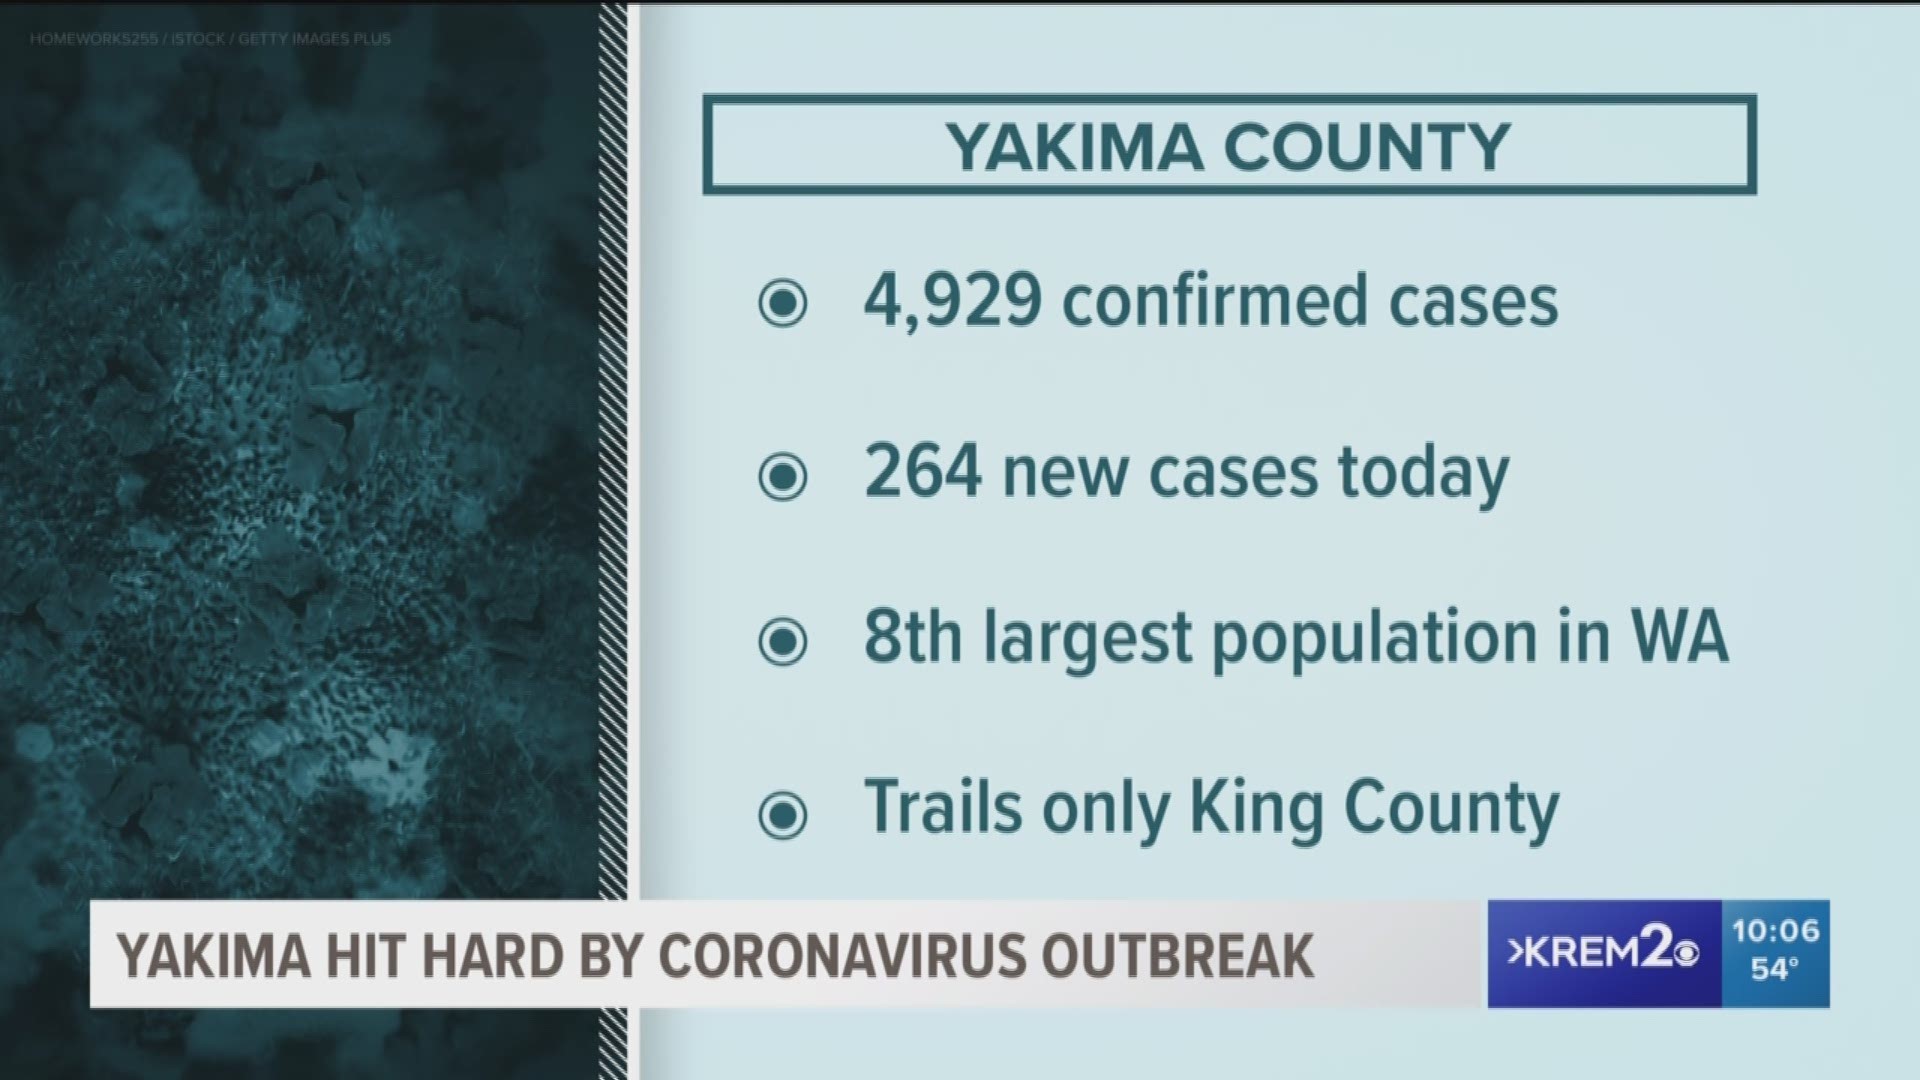 Yakima County now trails only King County in total confirmed cases in Washington.